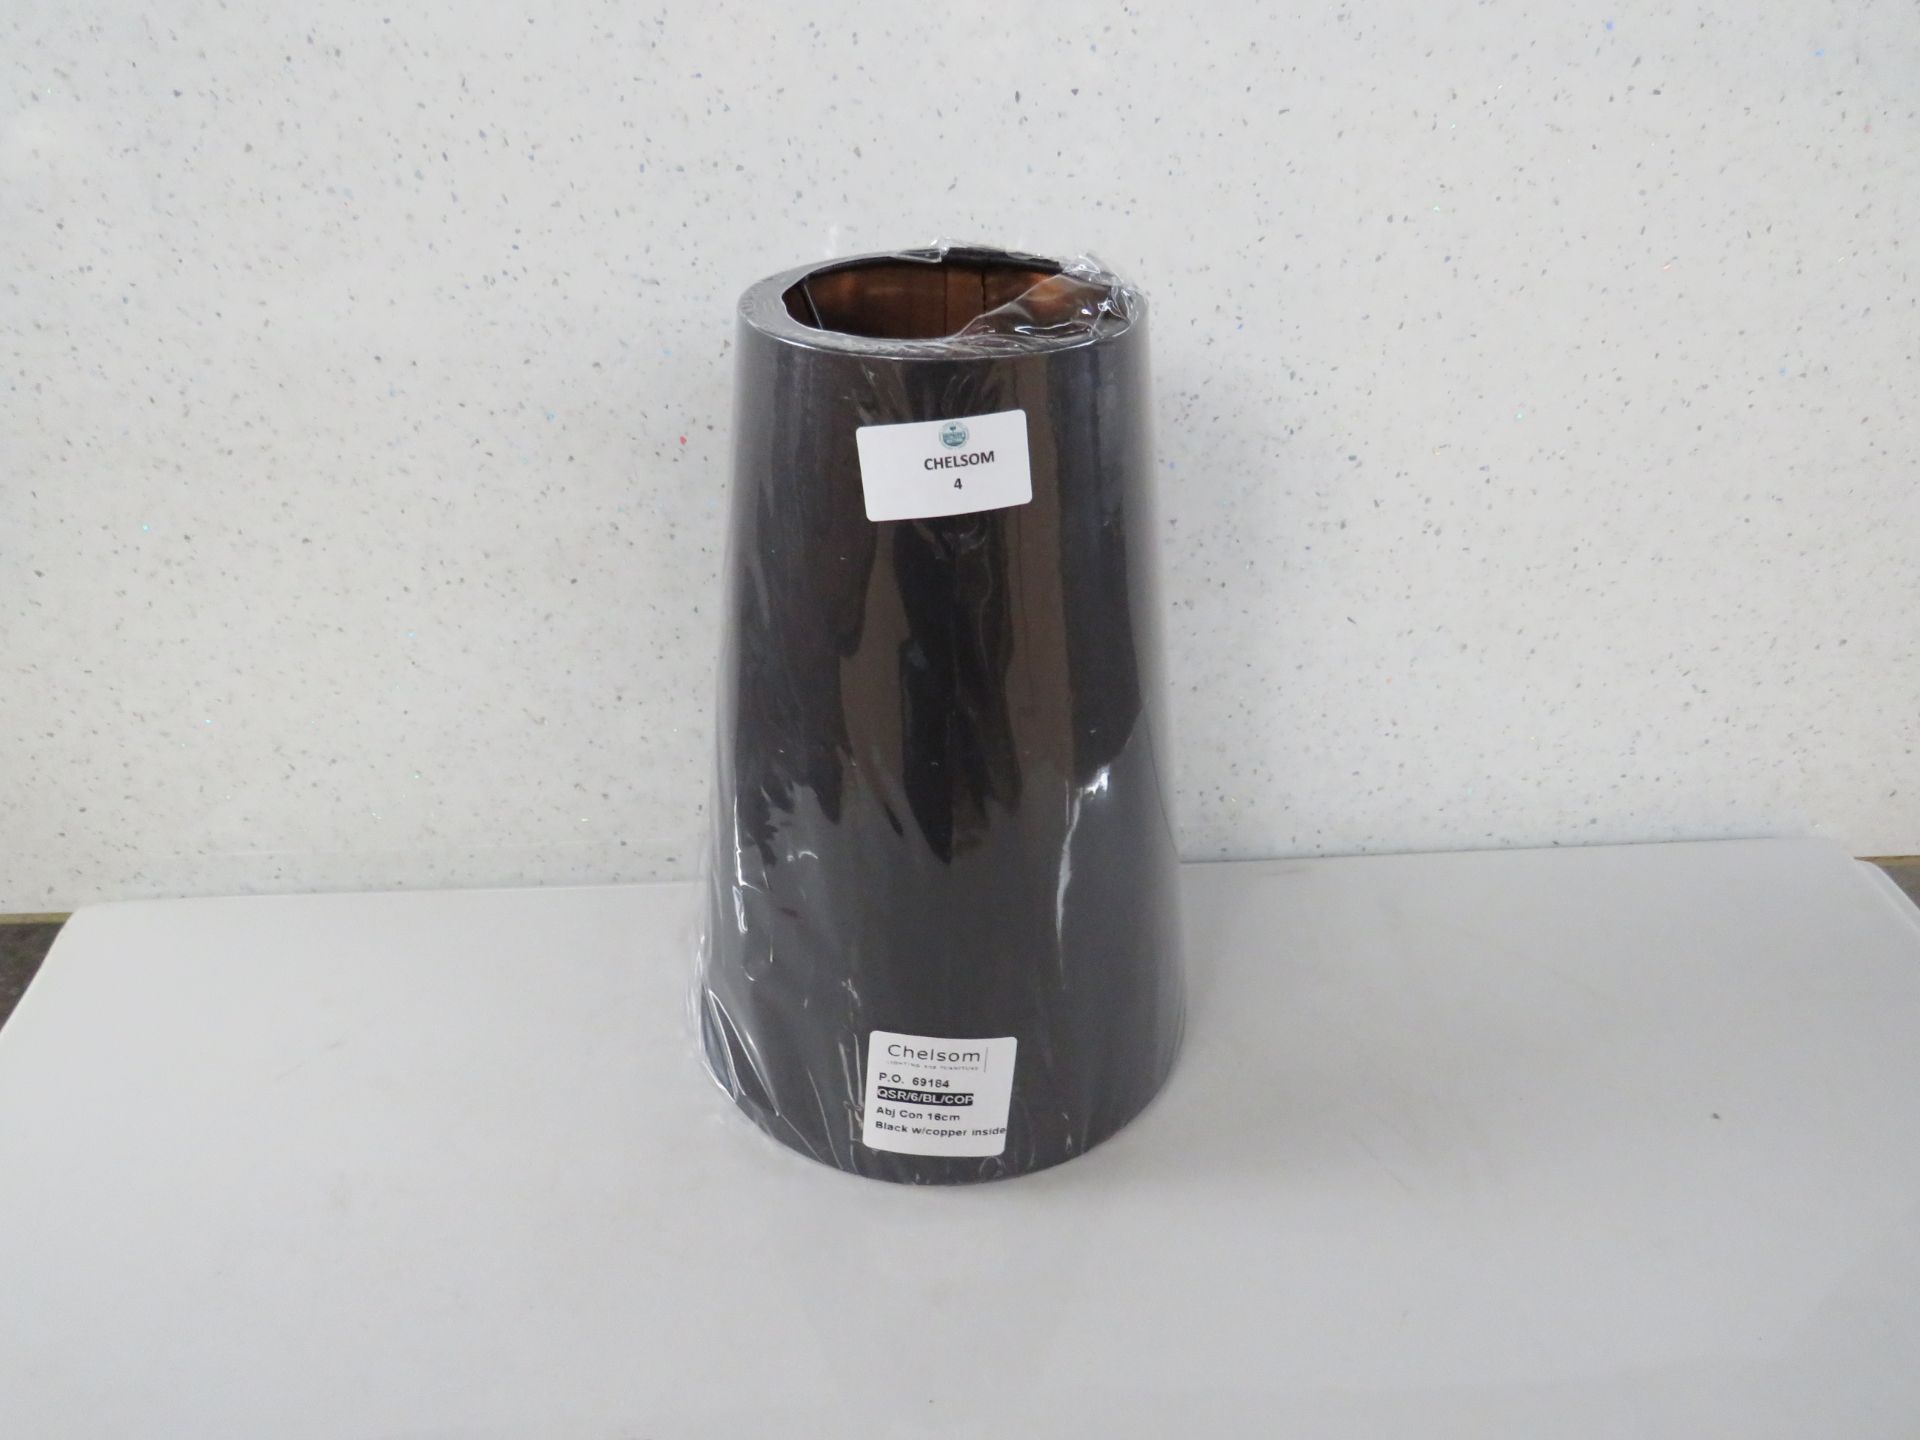 Chelsom - Black With Copper Inside 16cm Light Shade - New & Packaged.